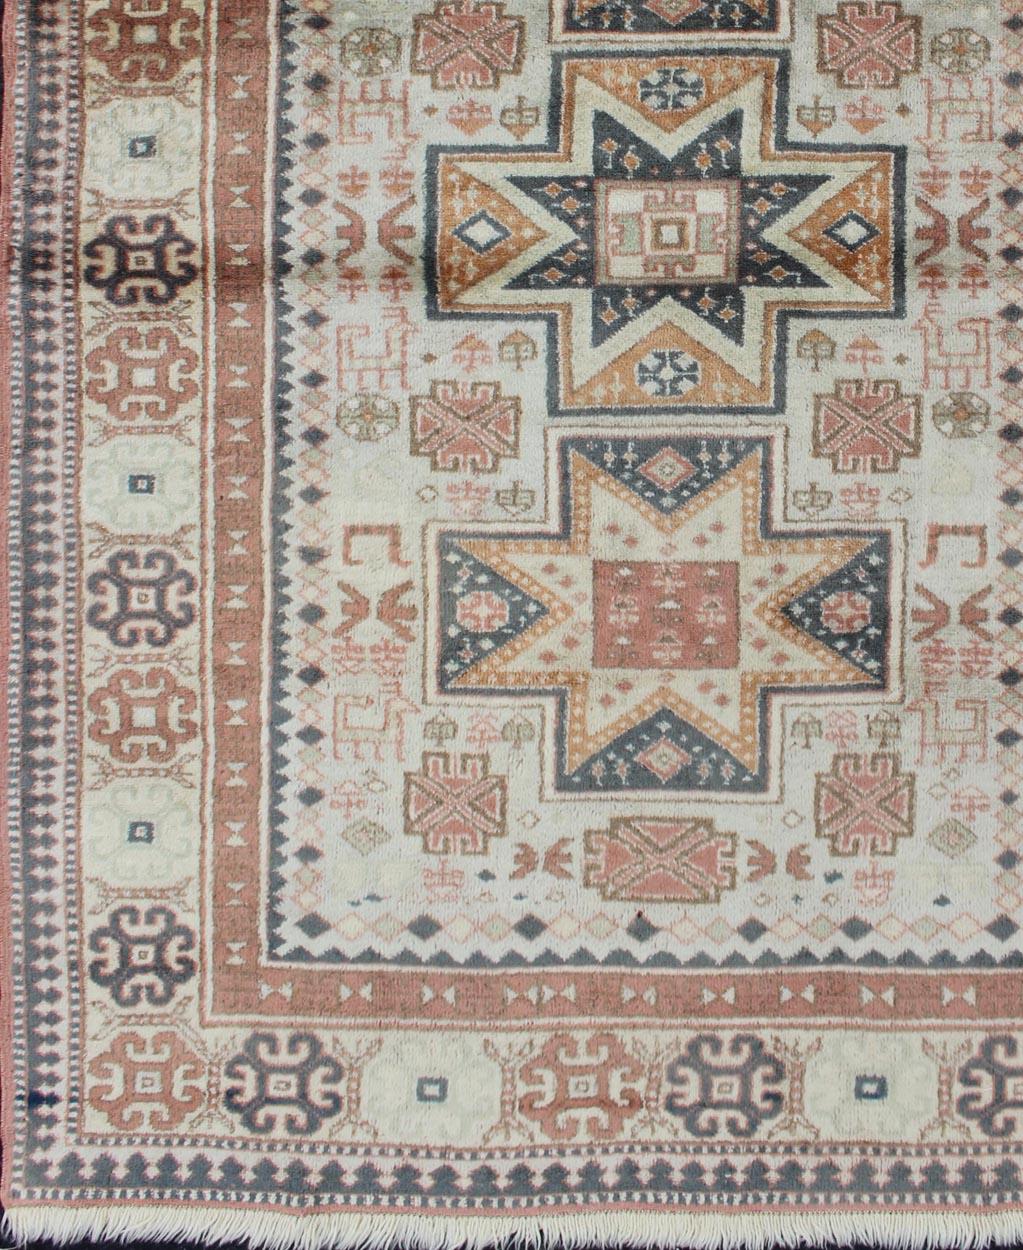 Vintage Hand Knotted Turkish Rug with Tribal Medallions and Design, Keivan Woven Arts /  rug 16-0302, country of origin / type: Turkey / Oushak, circa 1960

This Tribal rug from Turkey features a tri-medallion design rendered in cross shapes and a